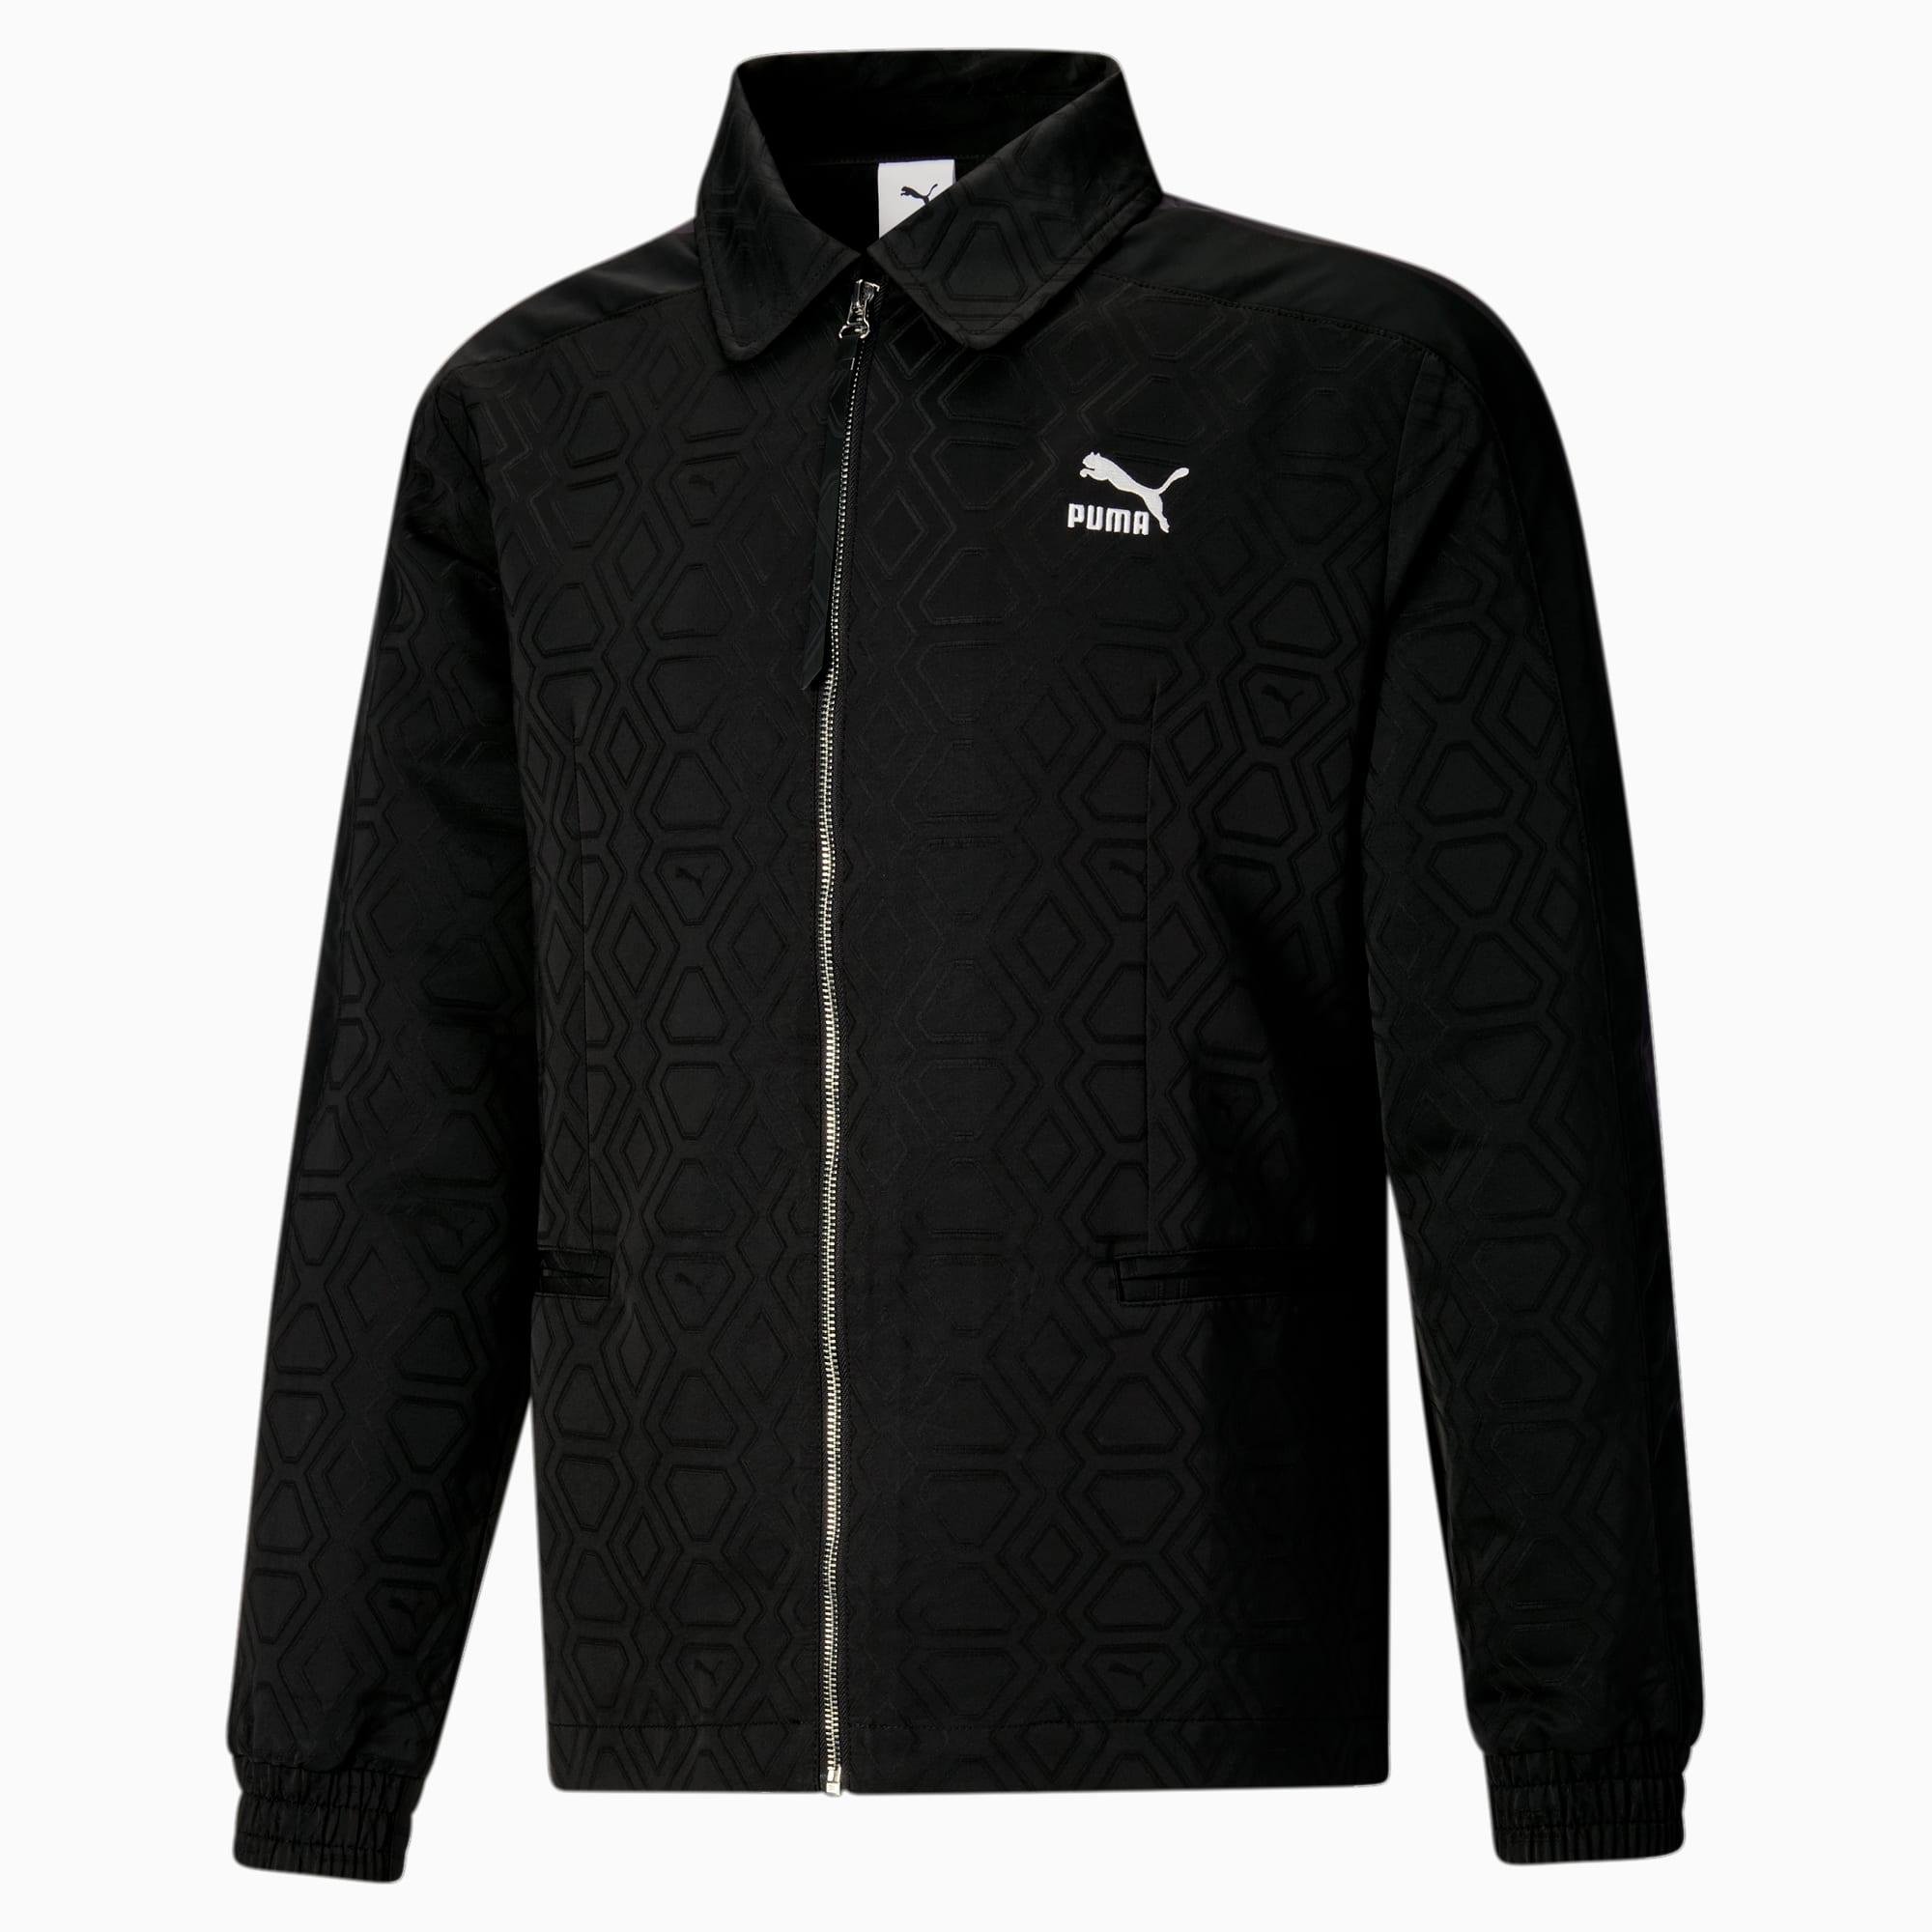 LUXE SPORT T7 Printed Jacket Men by PUMA